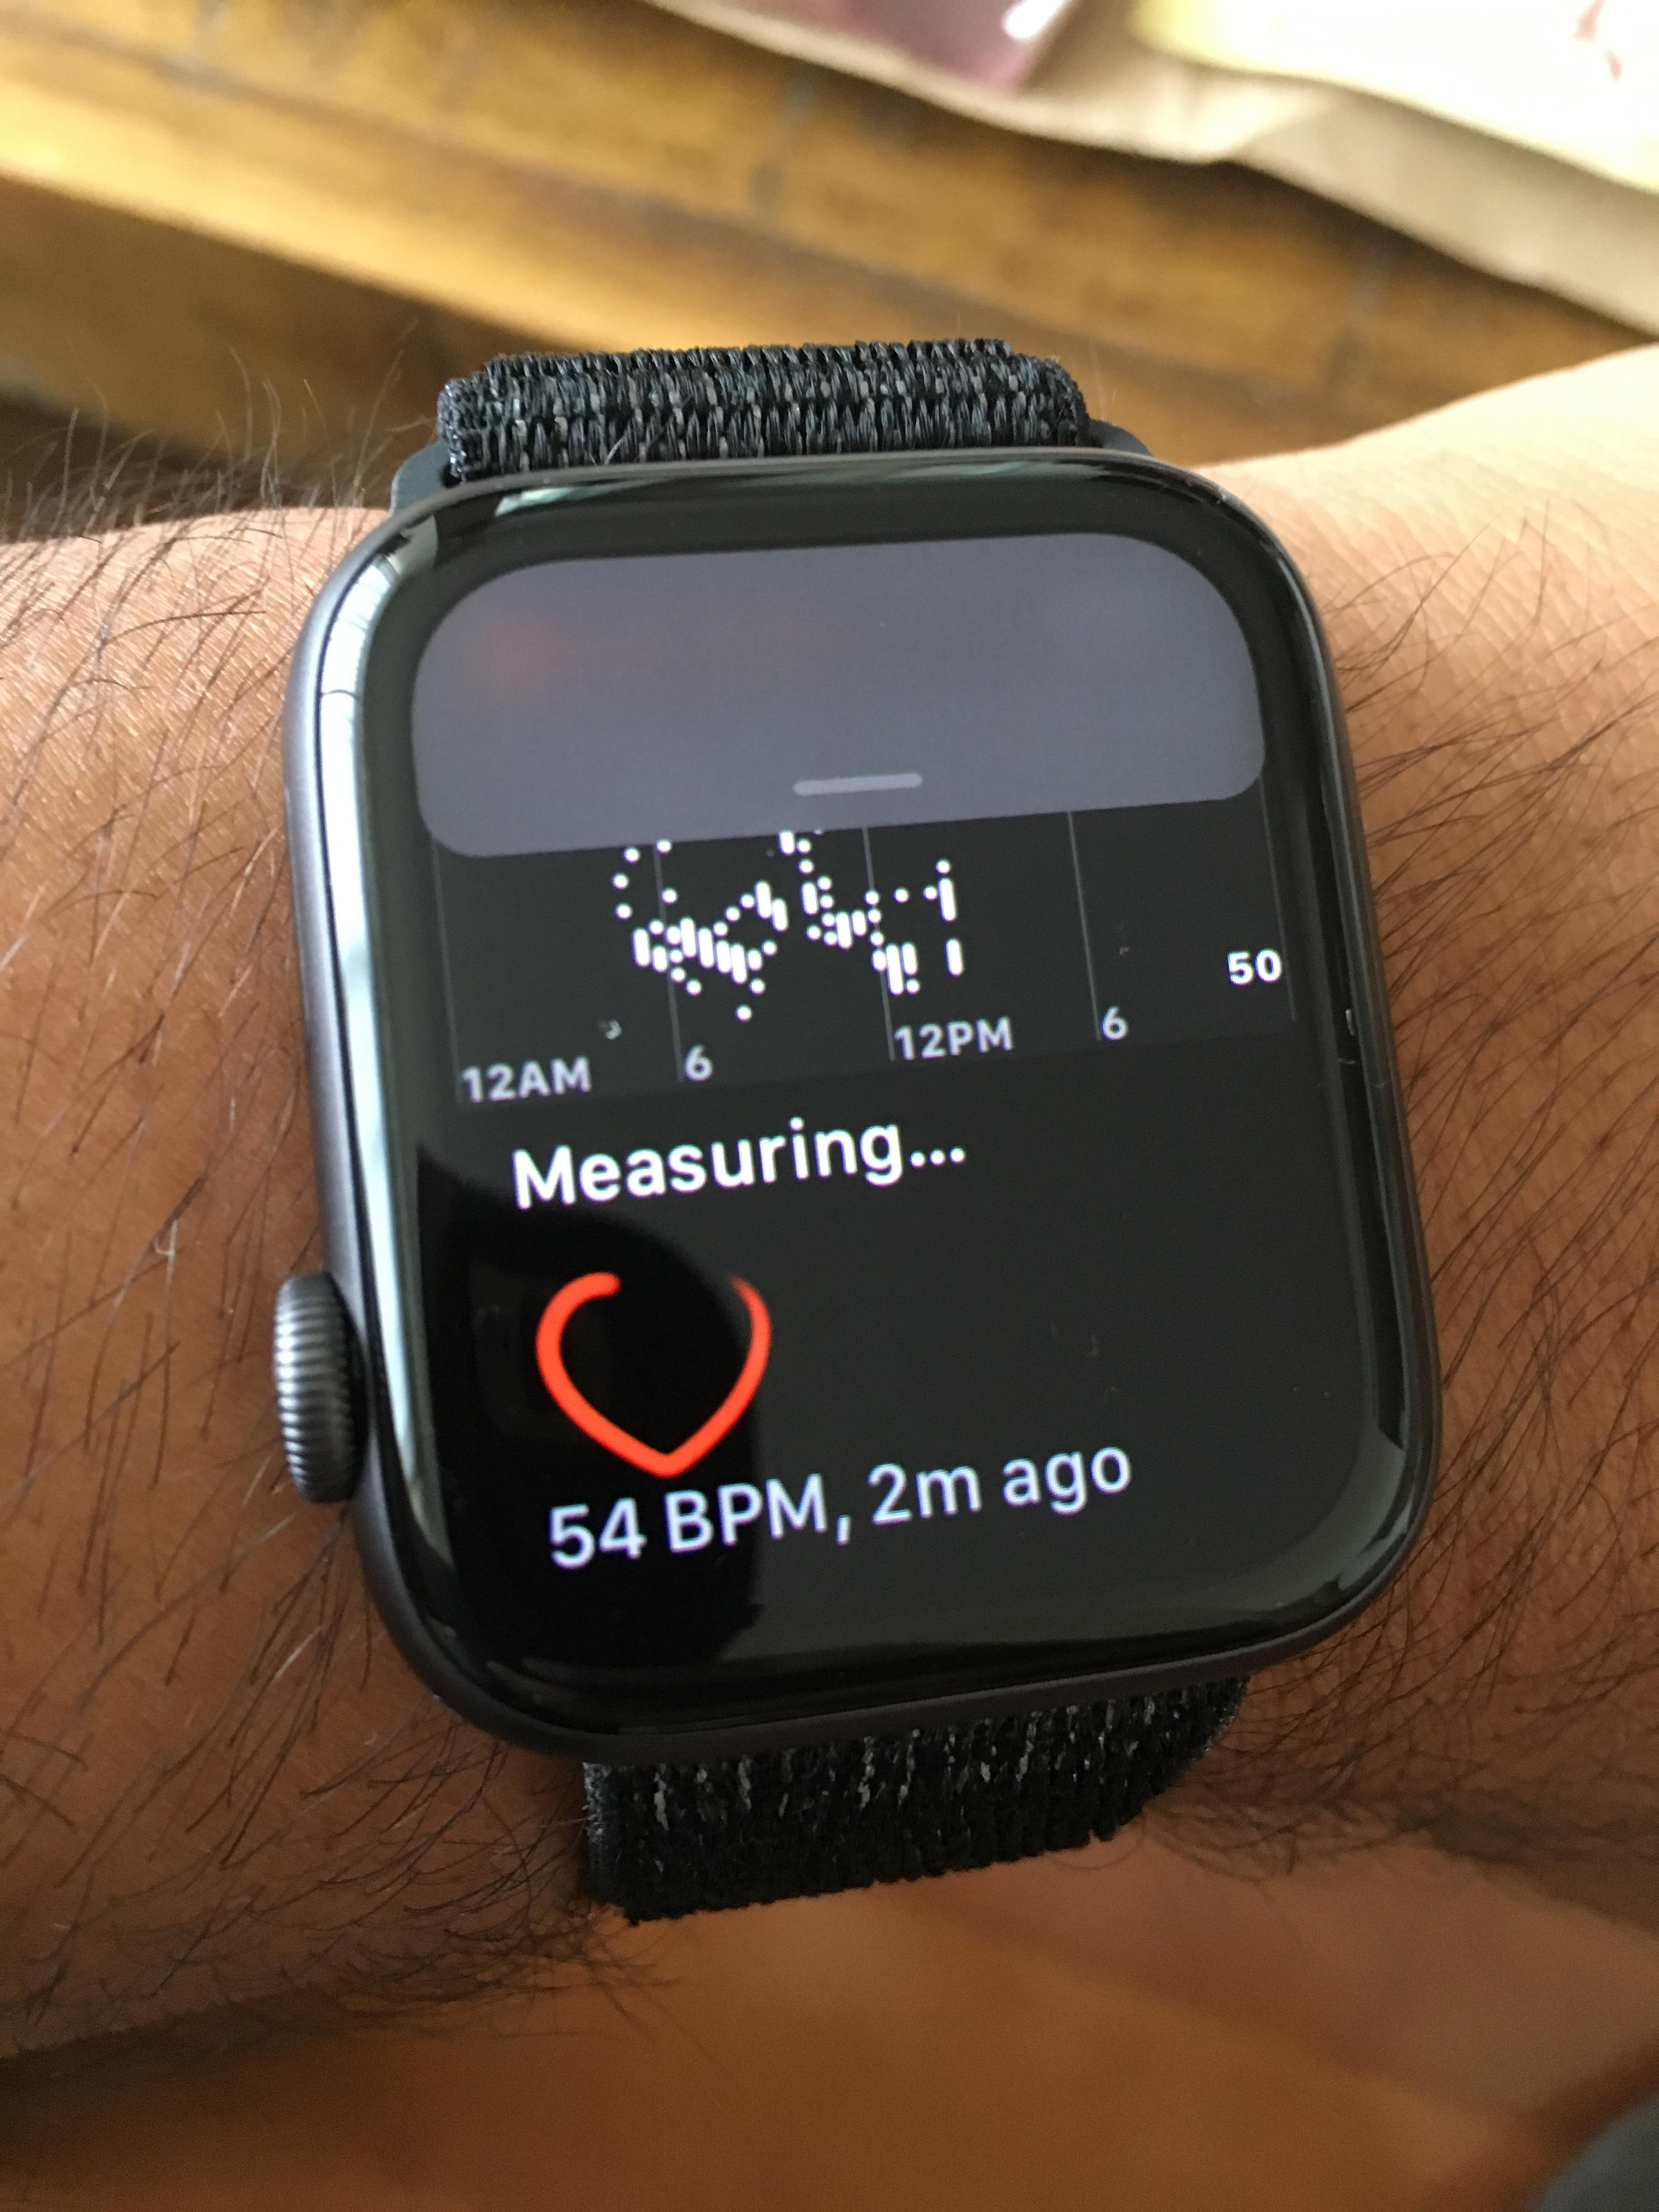 Hands on with the Nike+ Apple Watch Series 4 | AppleInsider